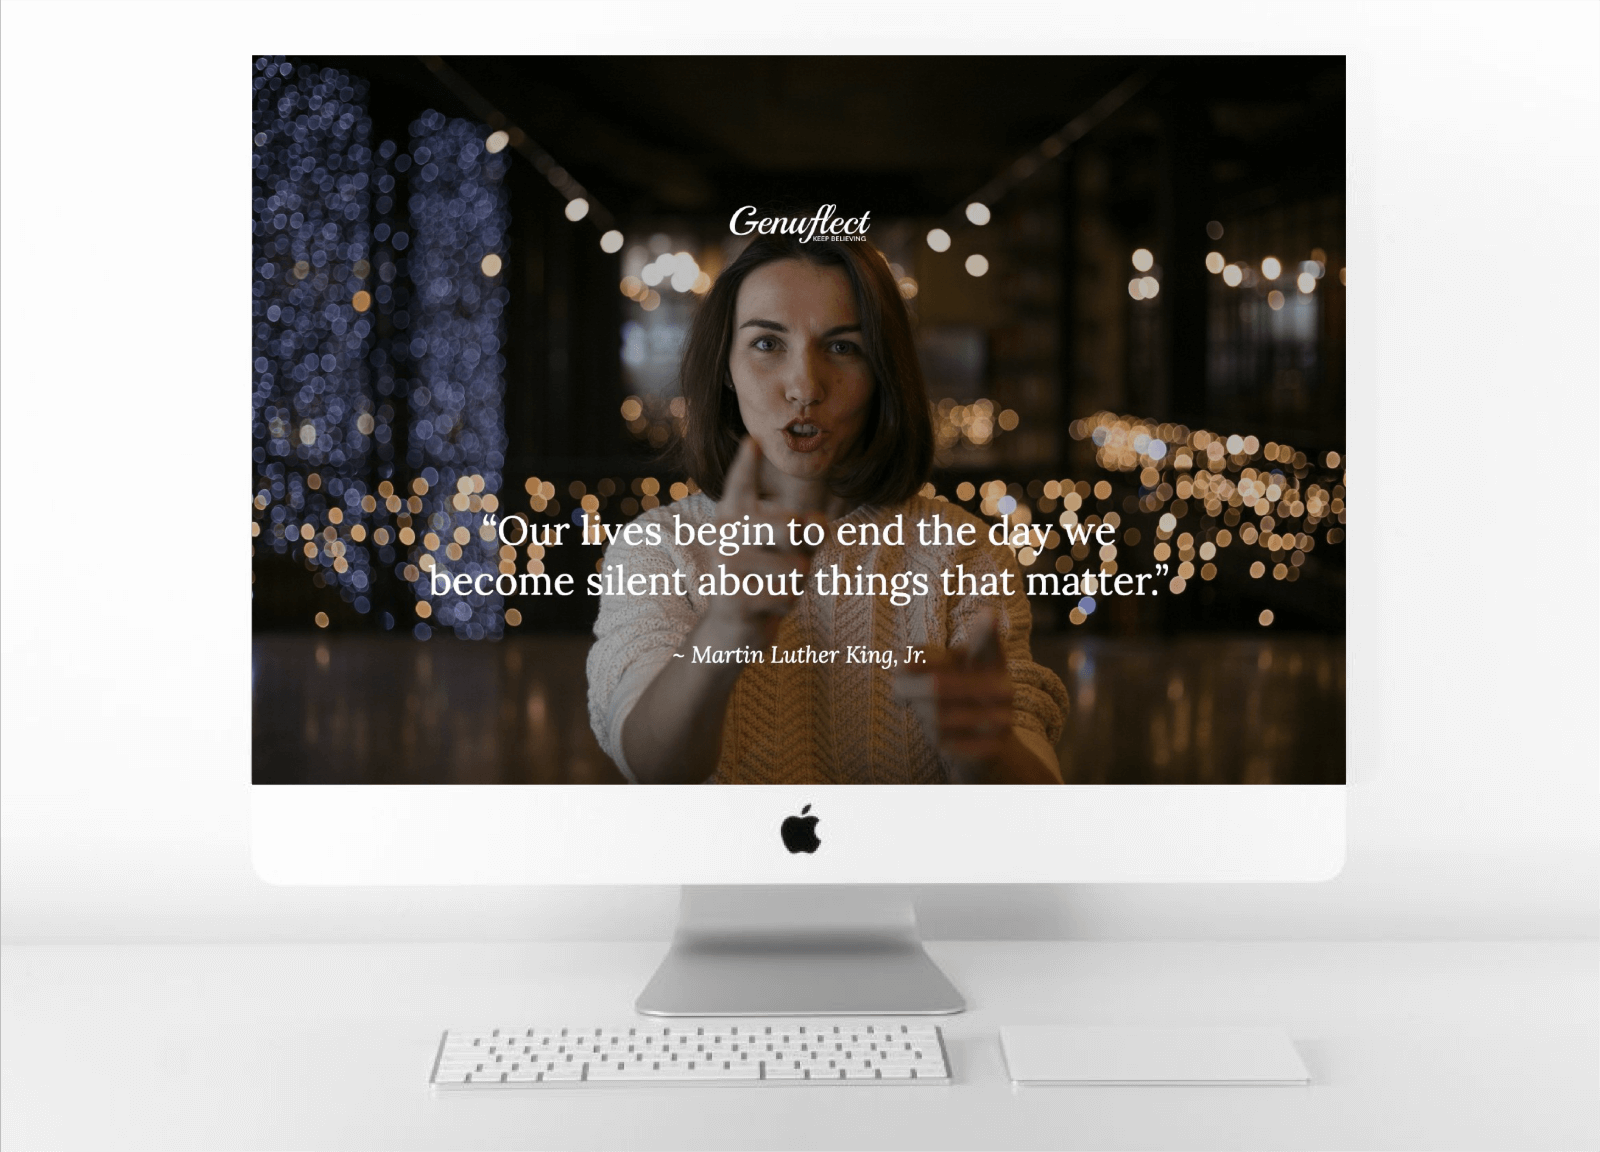 Genuflect computer background image of a Woman facing camera and talking while pointing with her fingers